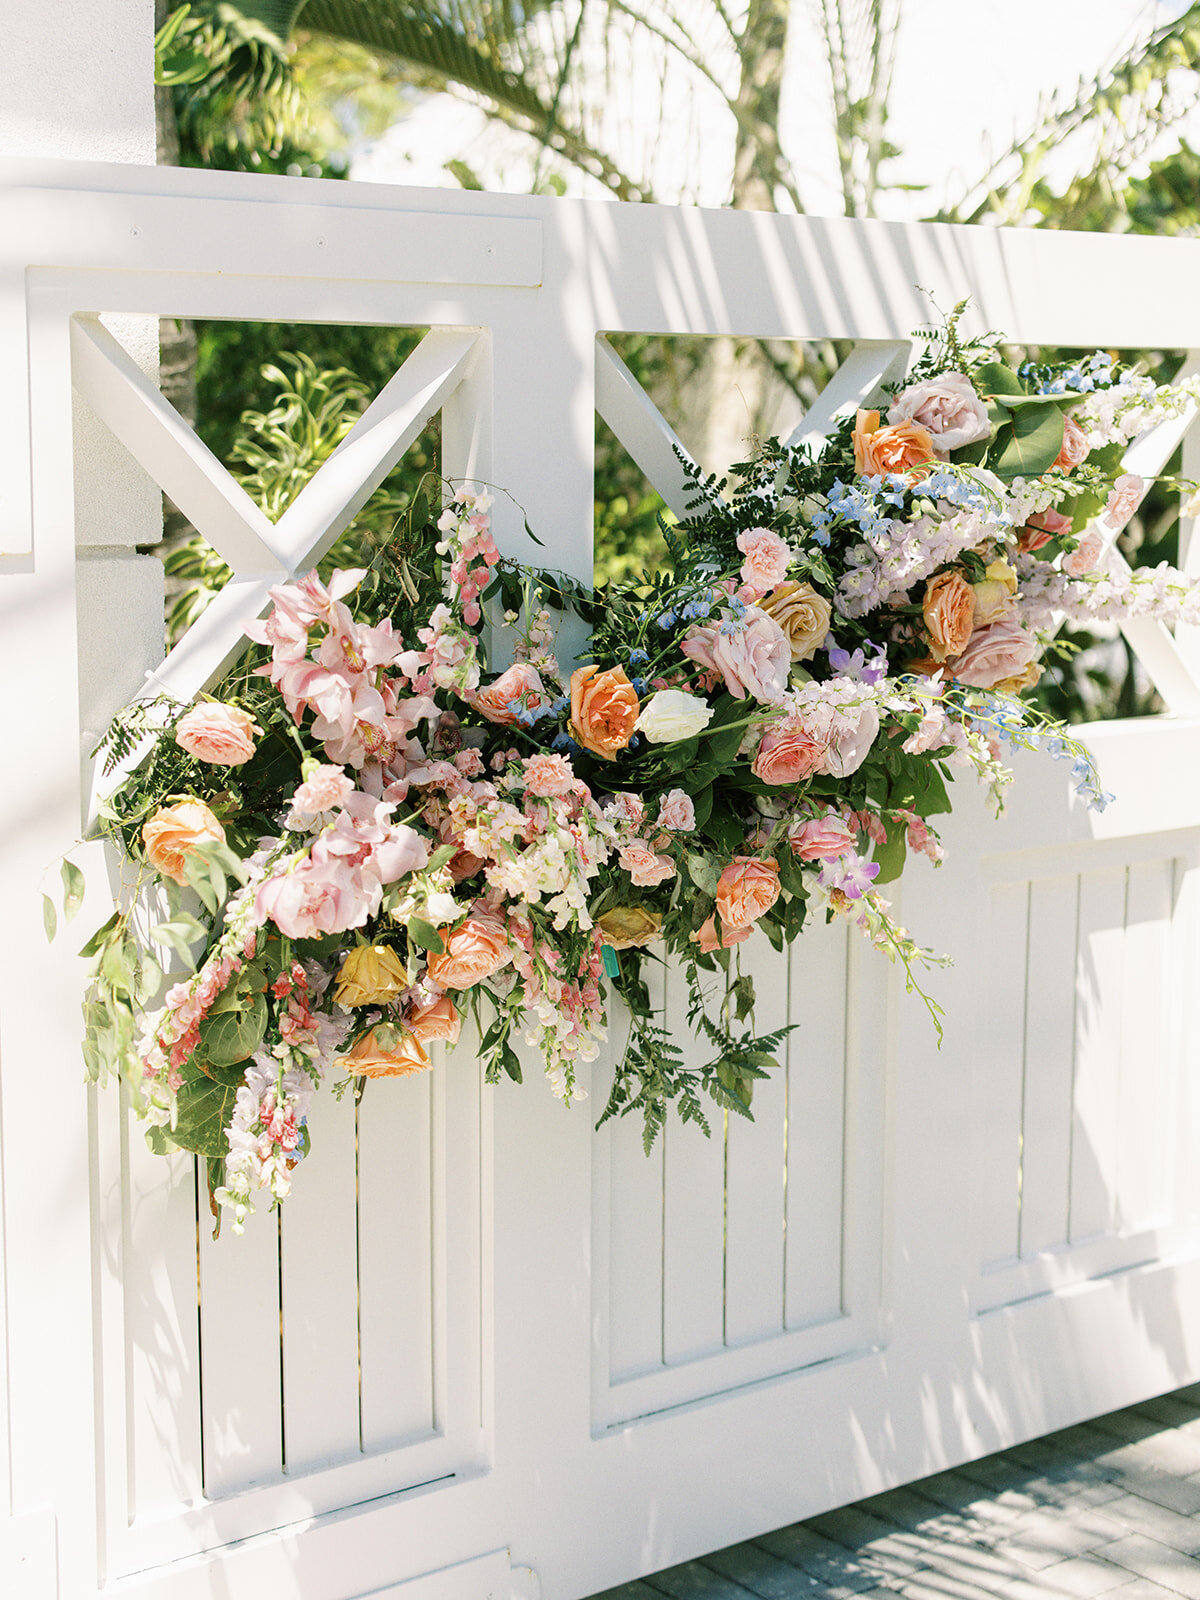 Gate and gatehouse tropical column floral installation for destination spring destination beach wedding in Exuma, Bahamas. Orchids and roses in tropical colors of orange, pink, lavender, dusty blue pale yellow and natural greens. Design by Rosemary & Finch Floral Design.